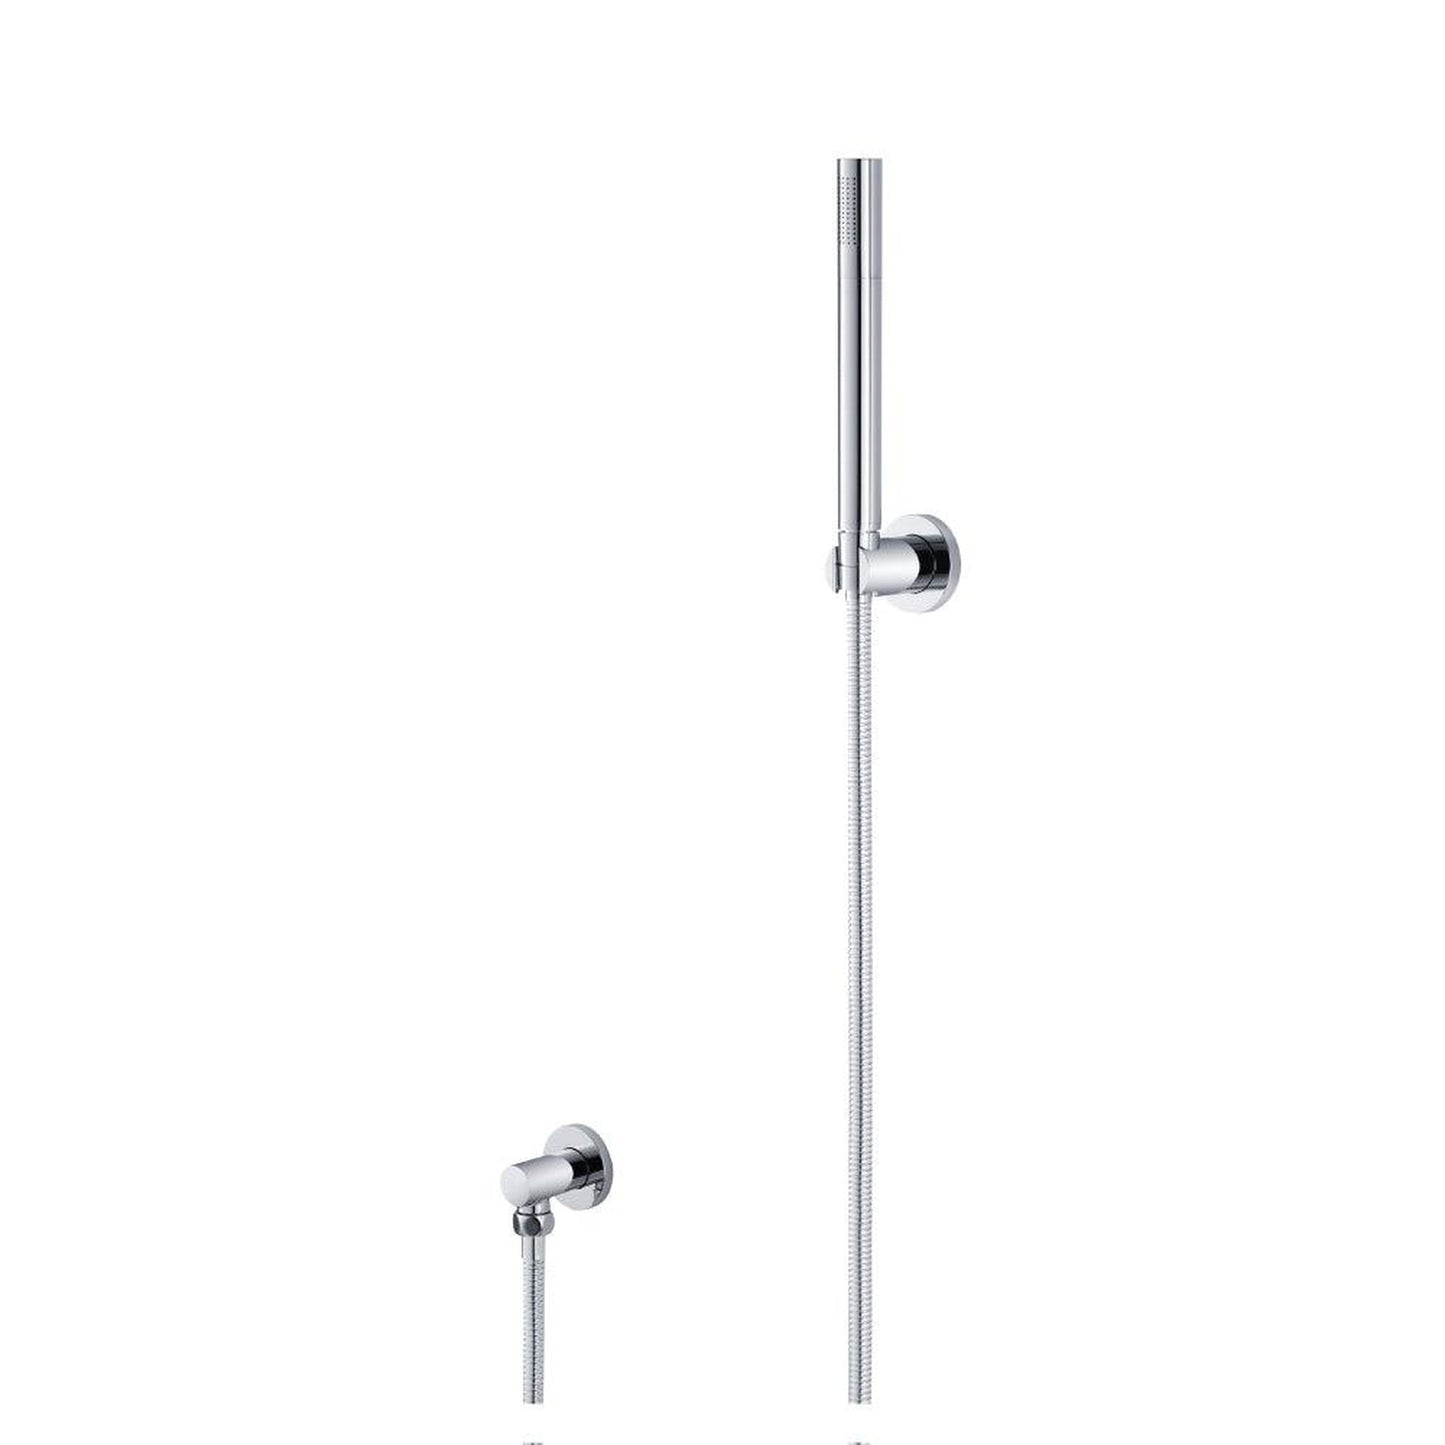 Isenberg Universal Fixtures Hand Shower Set With Wall Elbow, Holder and Hose in Polished Nickel (HS1004PN)